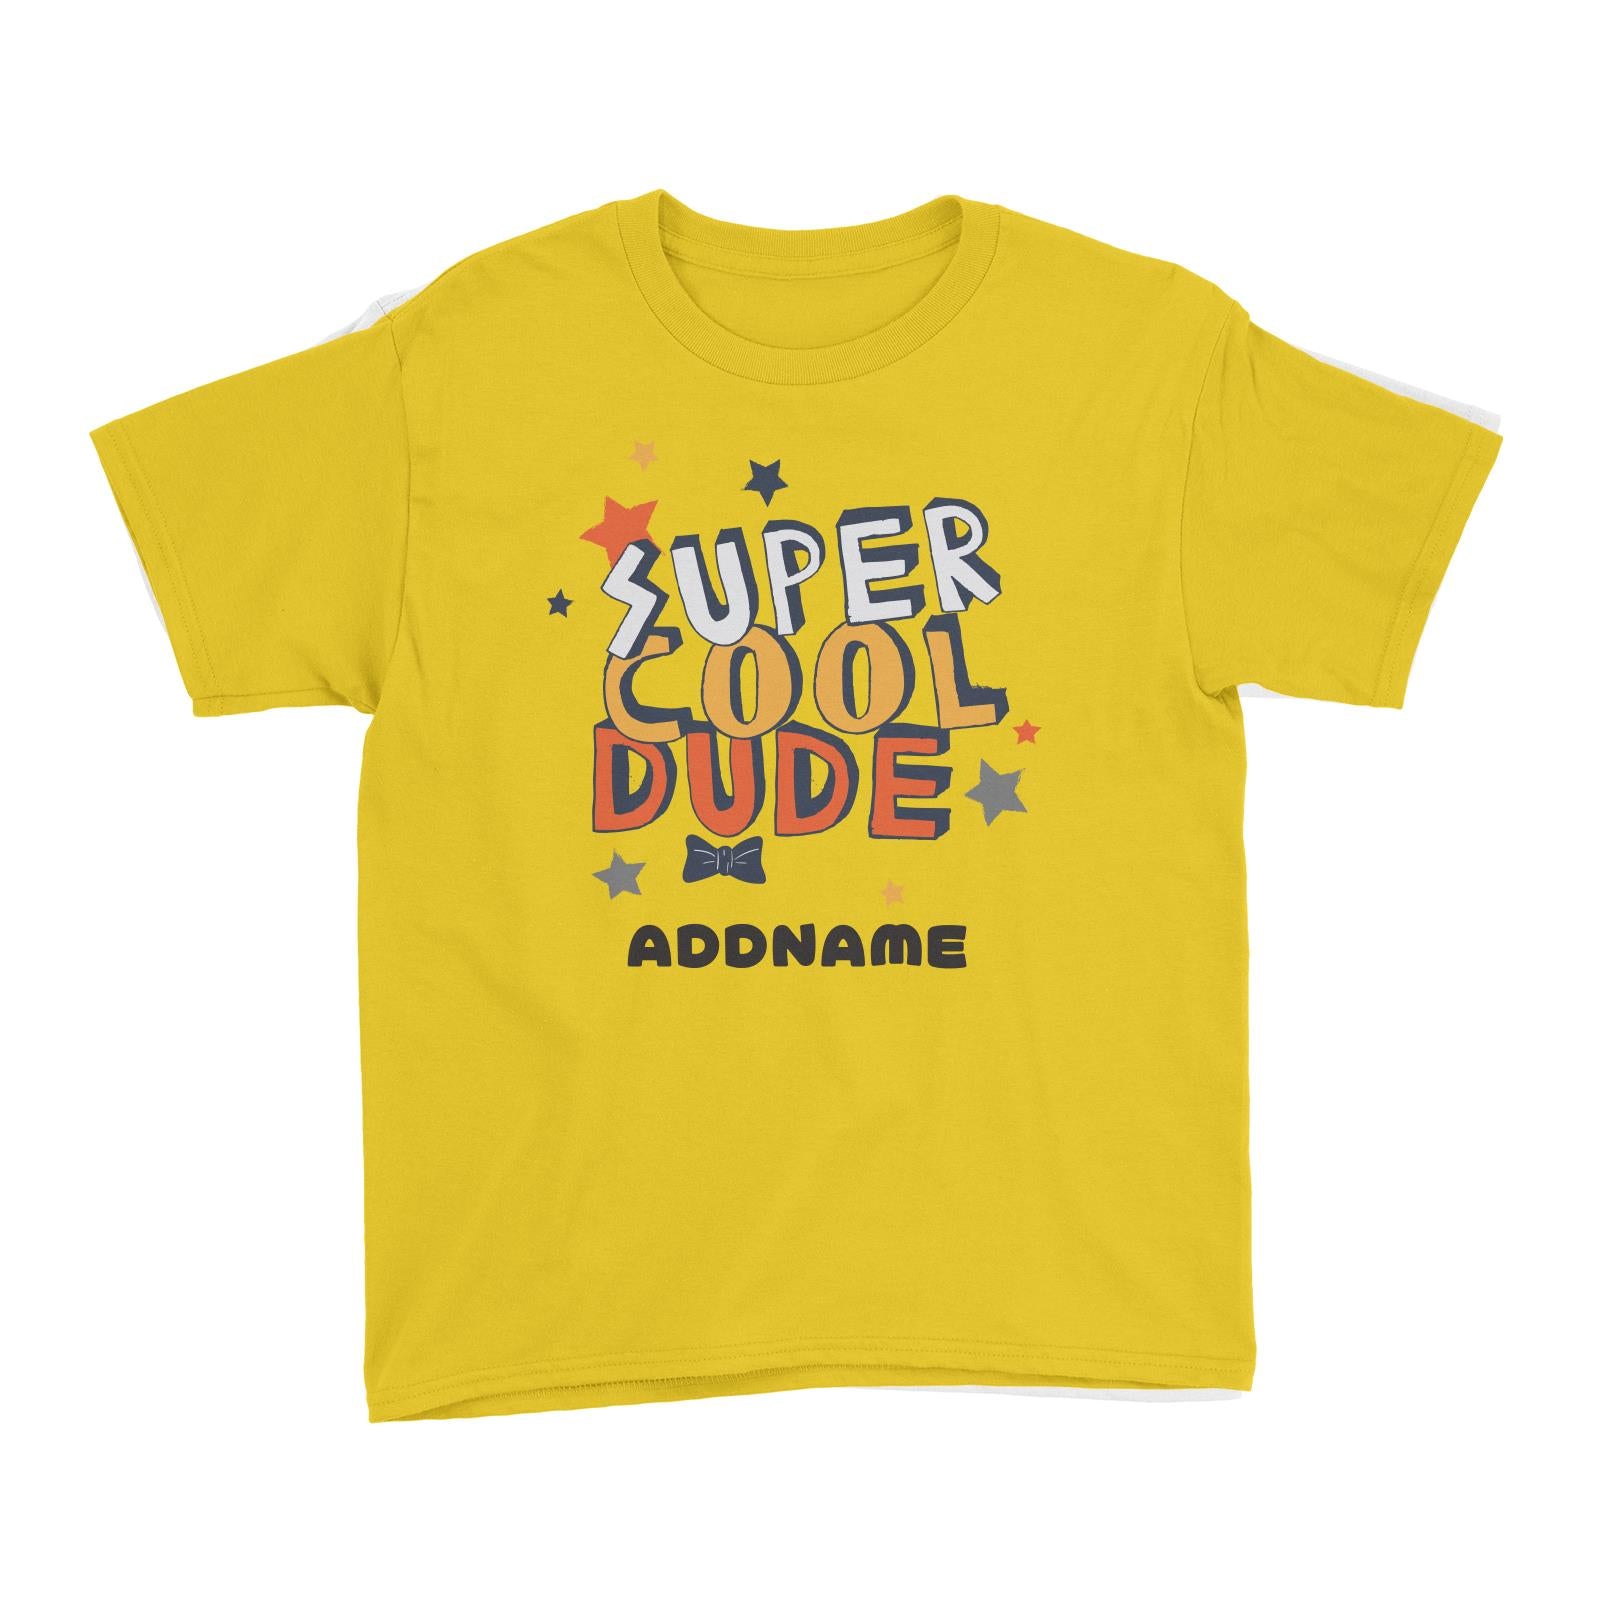 Super Cool Dude with Bow Tie Addname Kid's T-Shirt